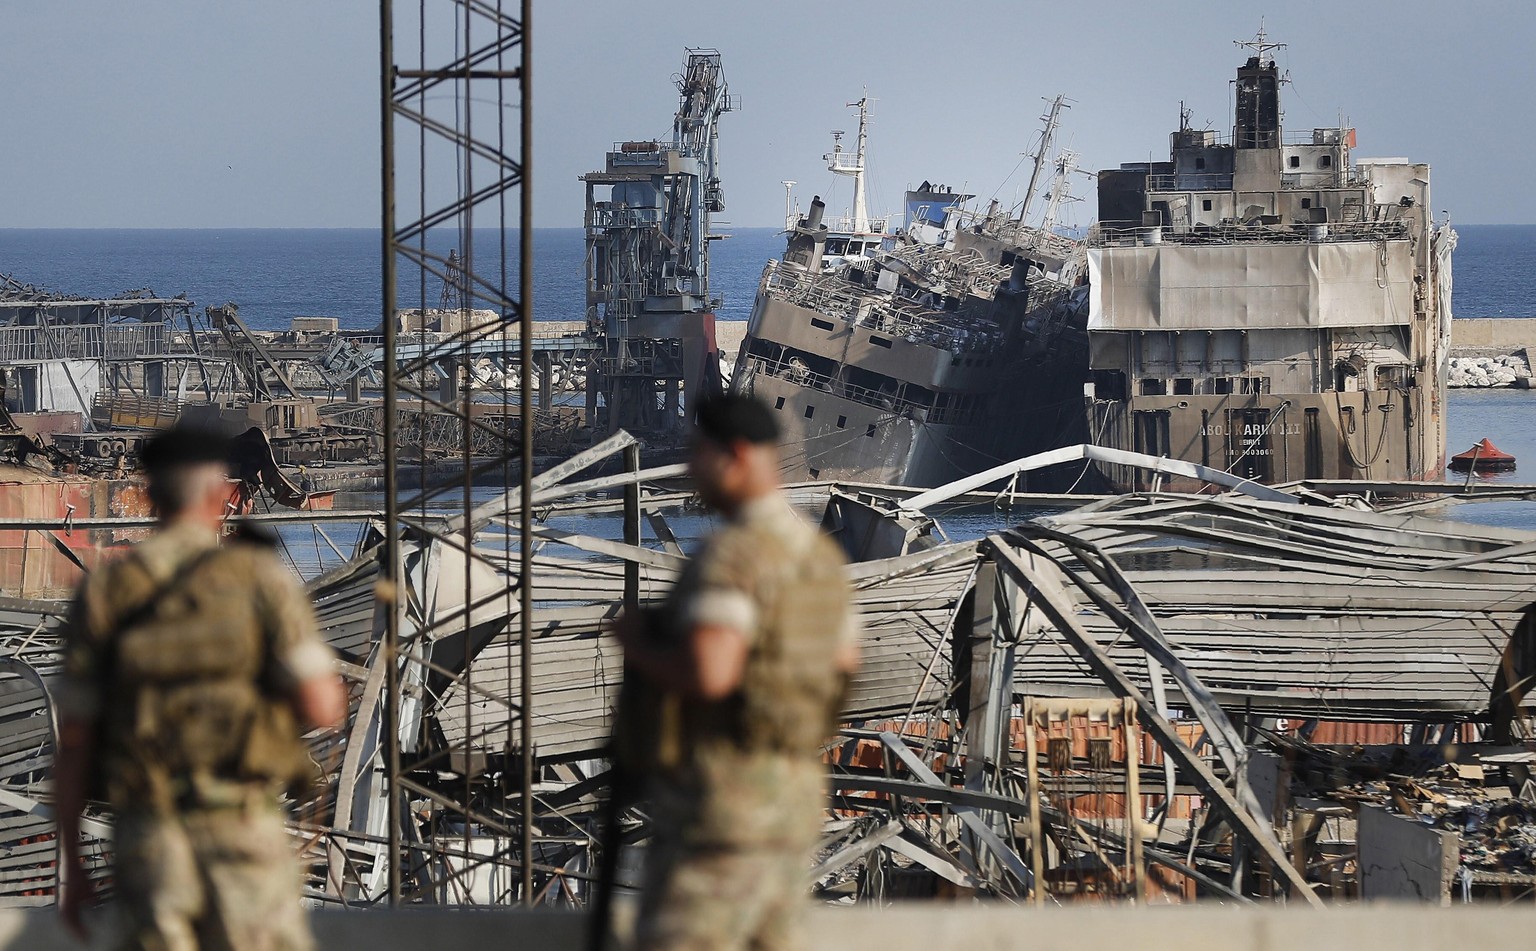 Lebanese army soldiers stand guard in front of destroyed ships at the scene where an explosion hit on Tuesday the seaport of Beirut, Lebanon, Thursday, Aug. 6, 2020. Lebanese army bulldozers plowed th ...